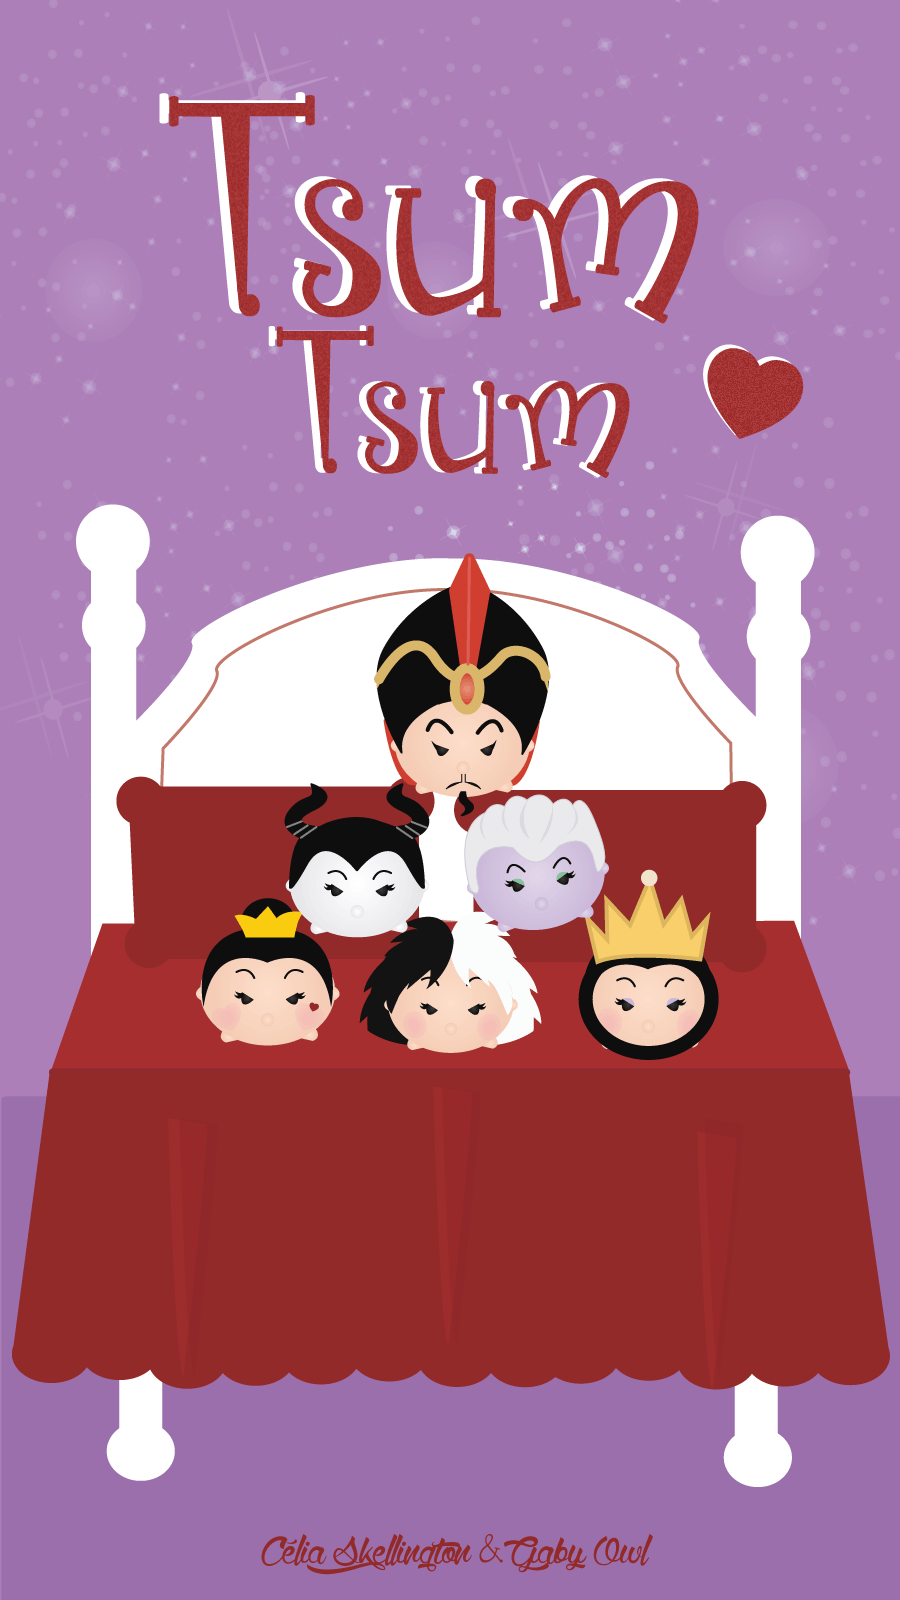 Tsum Tsum ★ Find more Cute Disney wallpapers for your +